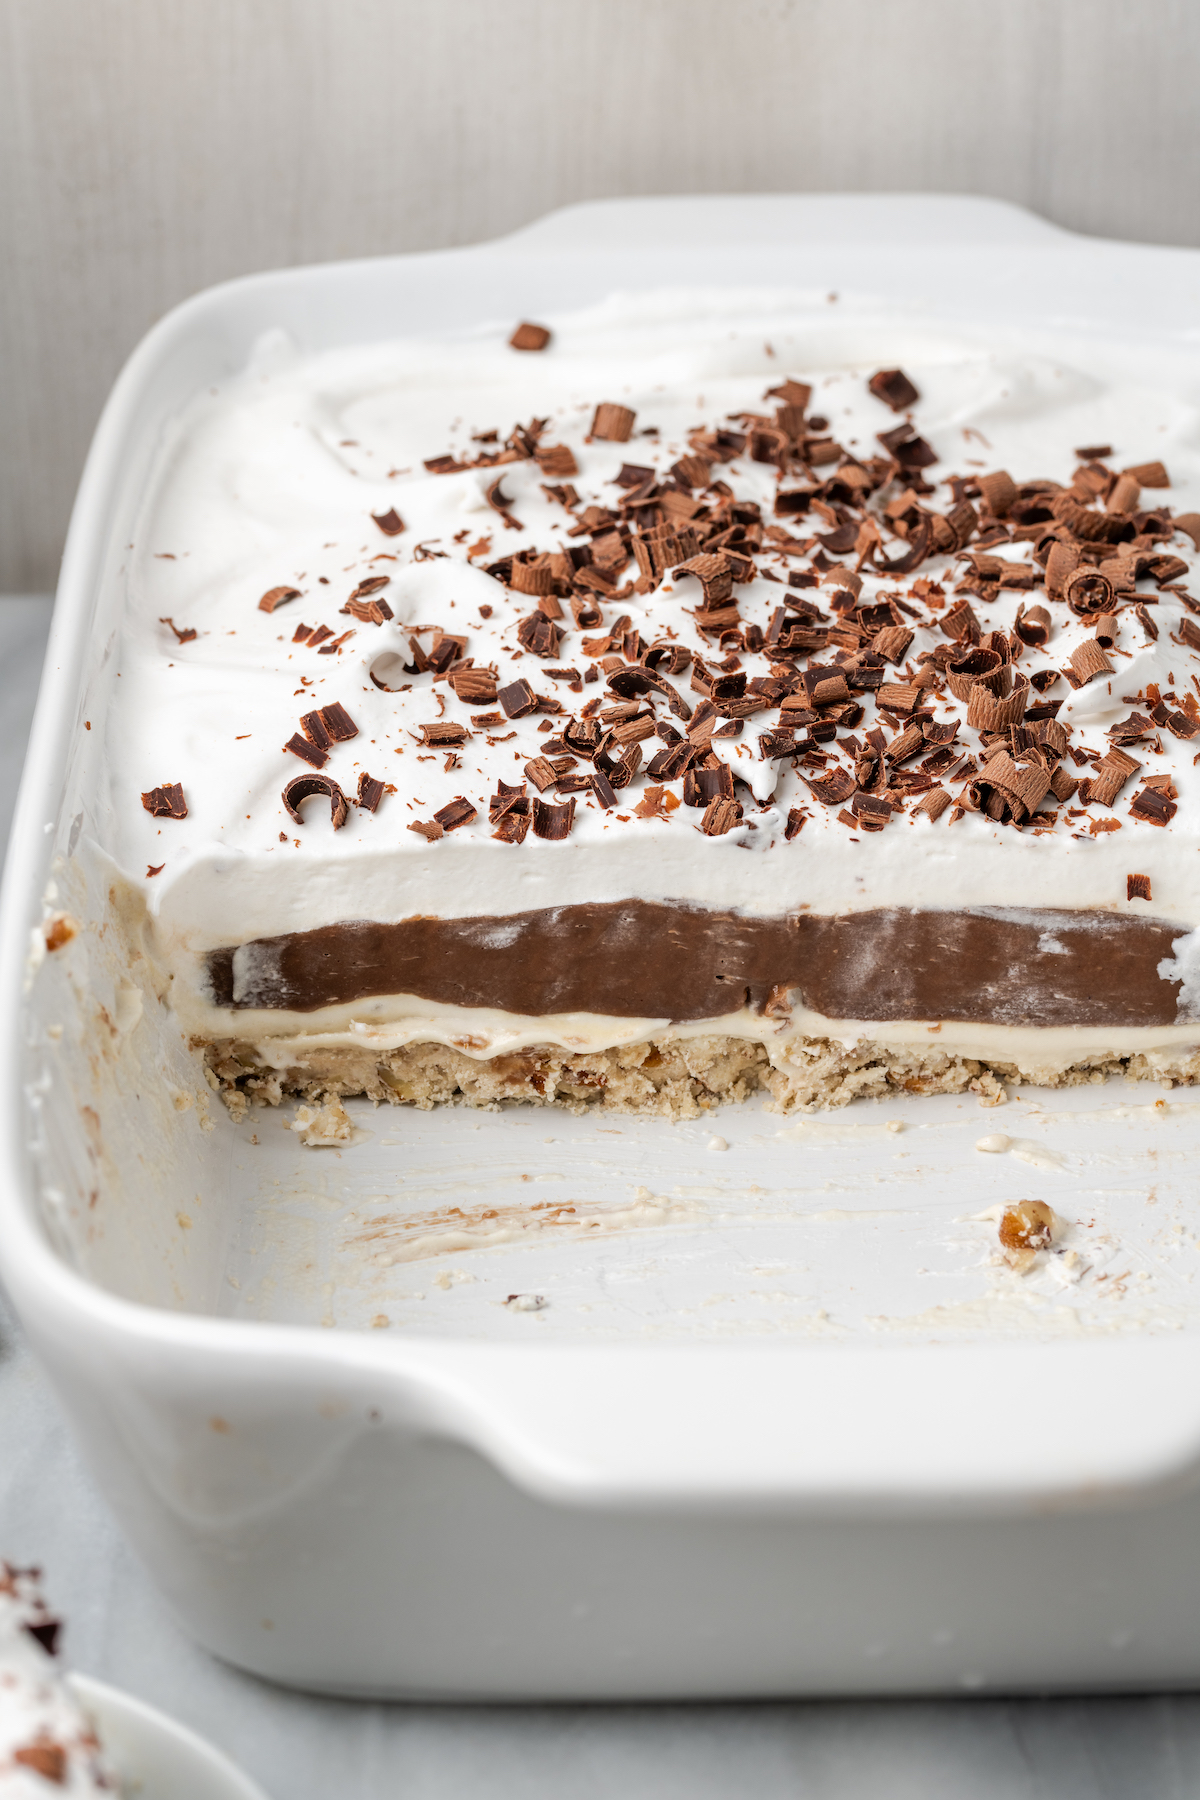 Layered chocolate delight in baking dish